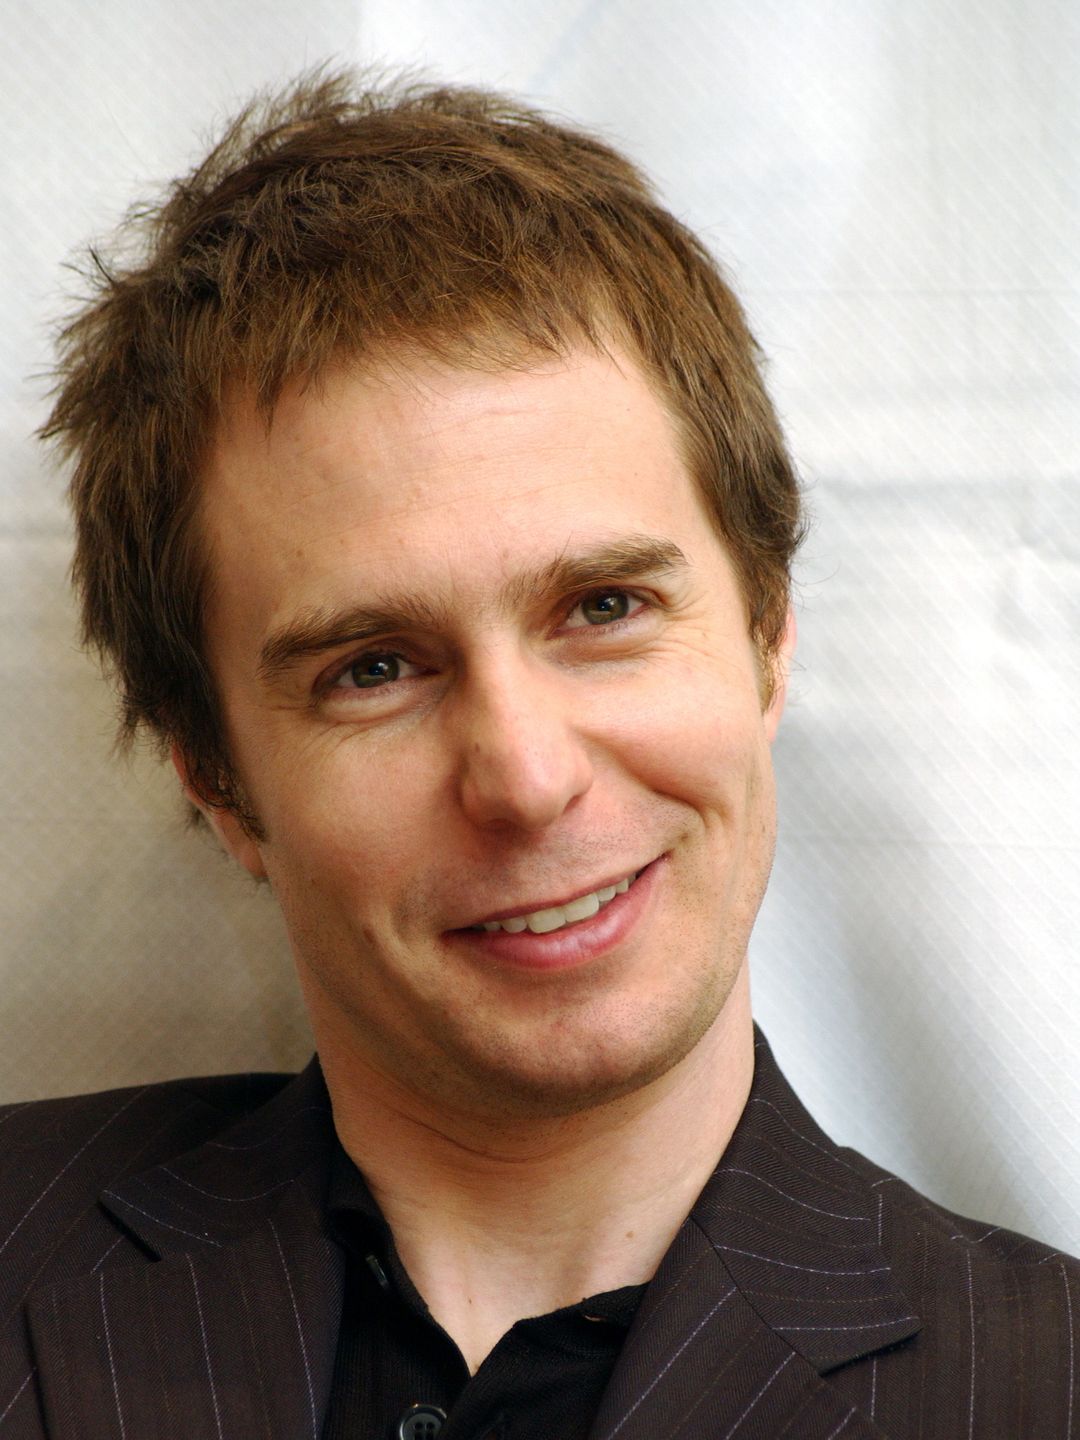 Sam Rockwell in real life